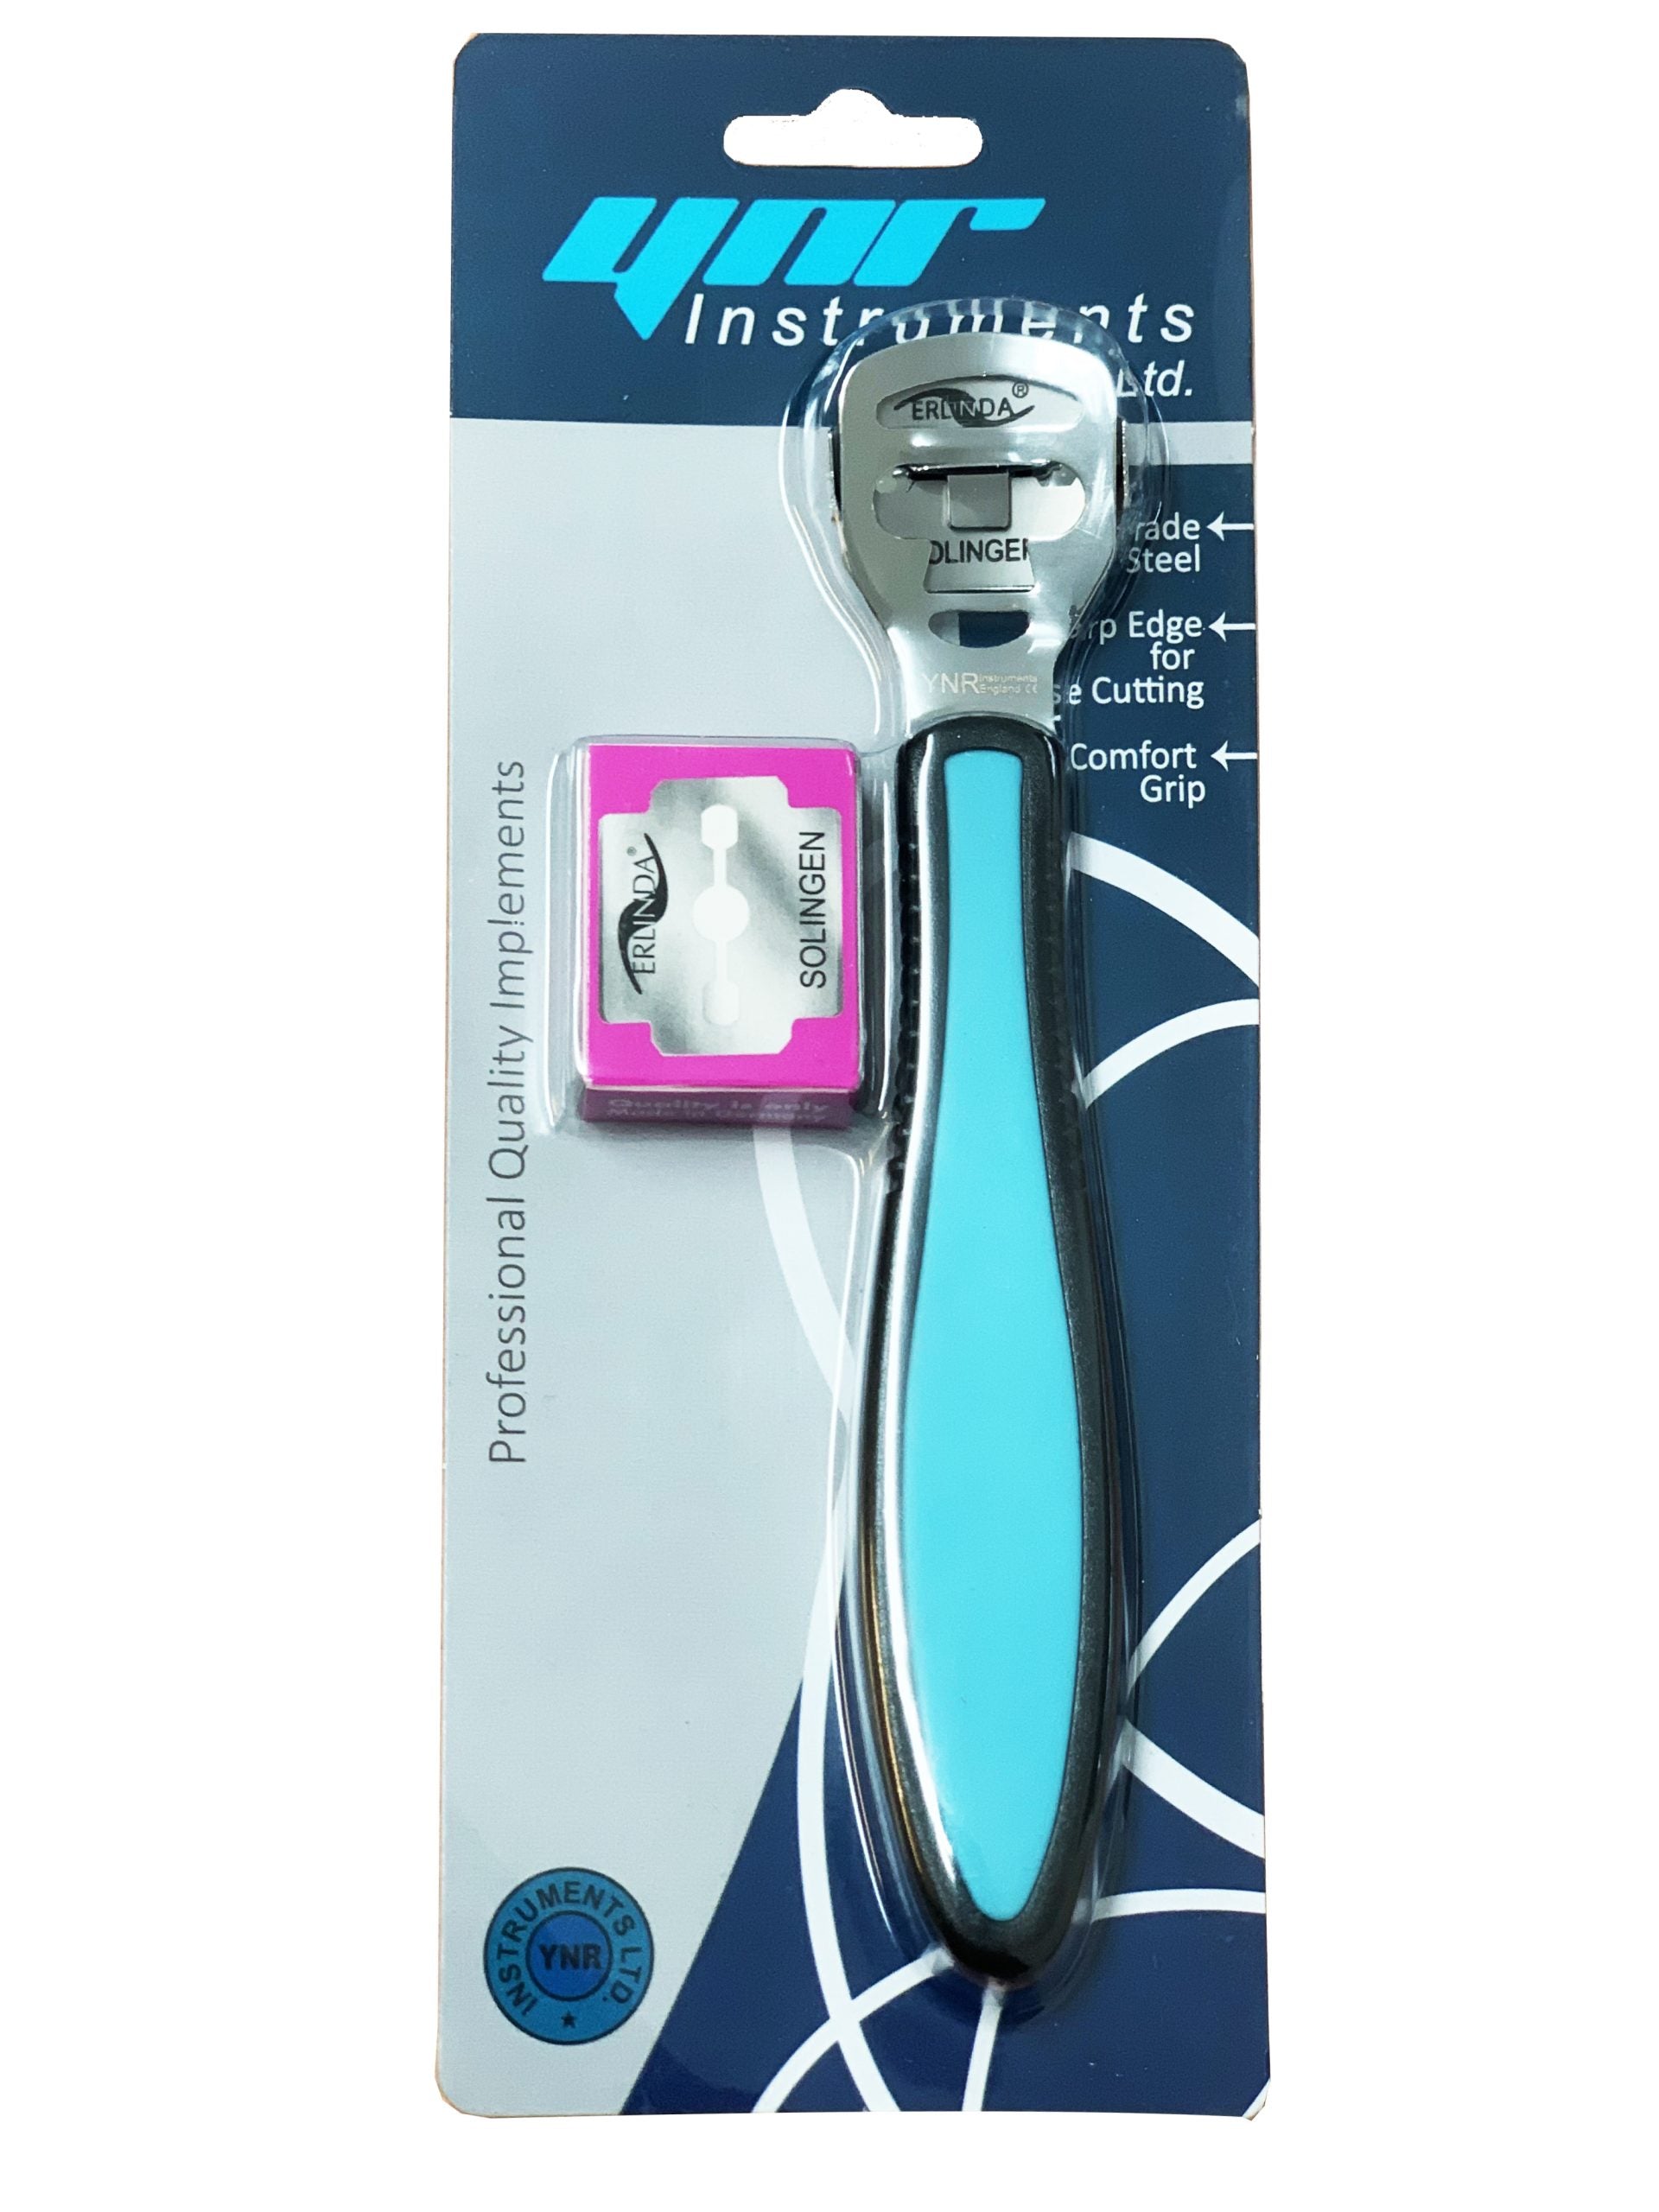 TRIM Foot Care Callus Remover & Corn Shaver with Replacement Blades